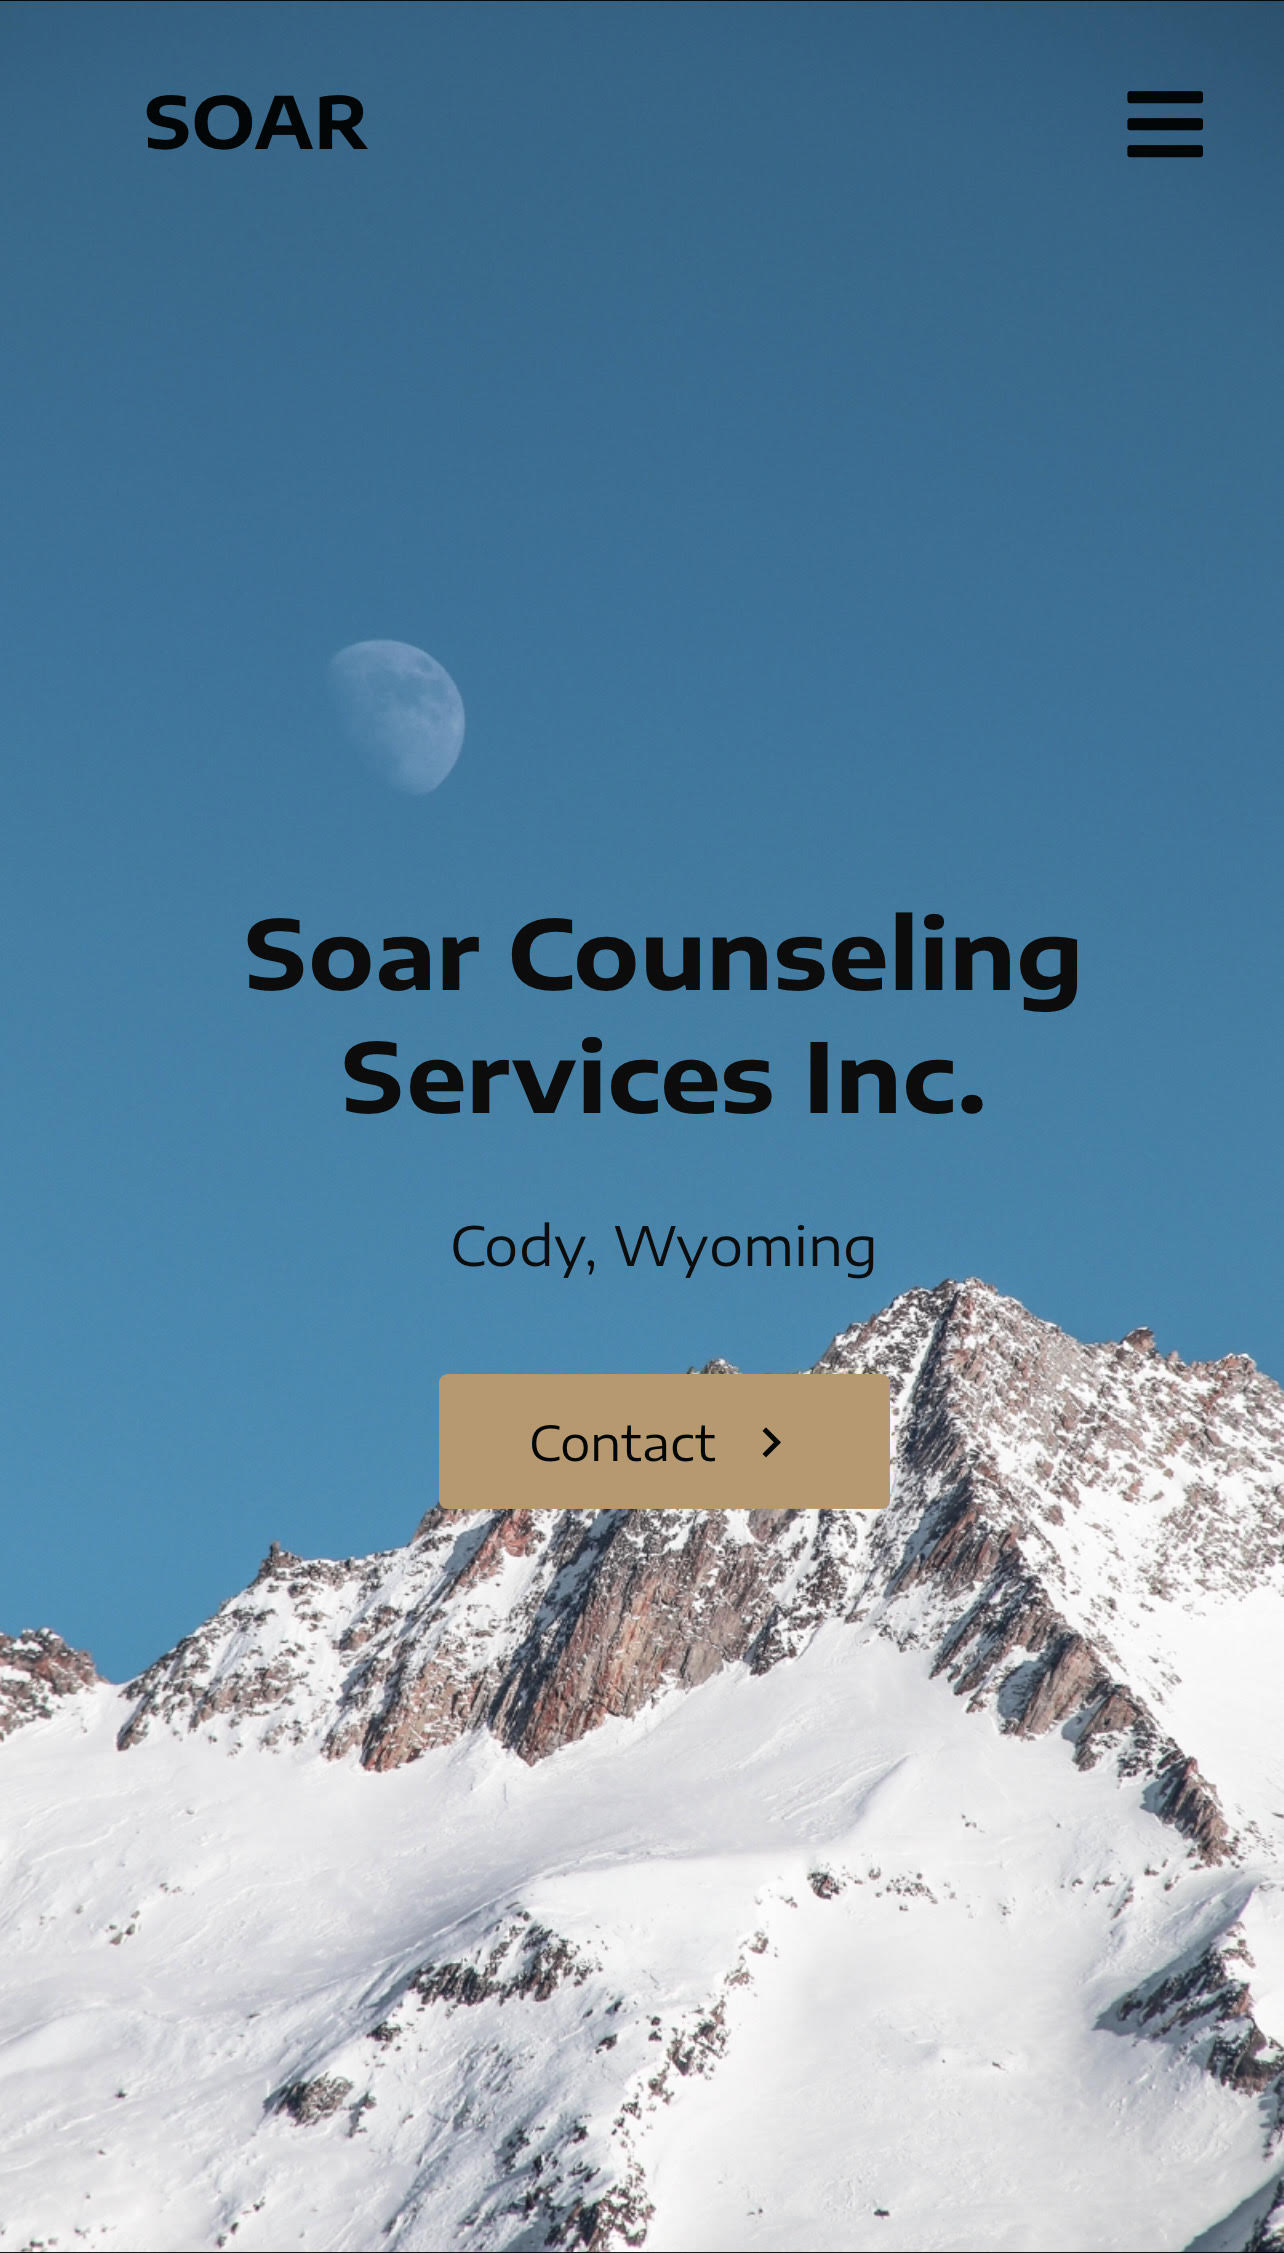 Soar Counseling Services Inc.